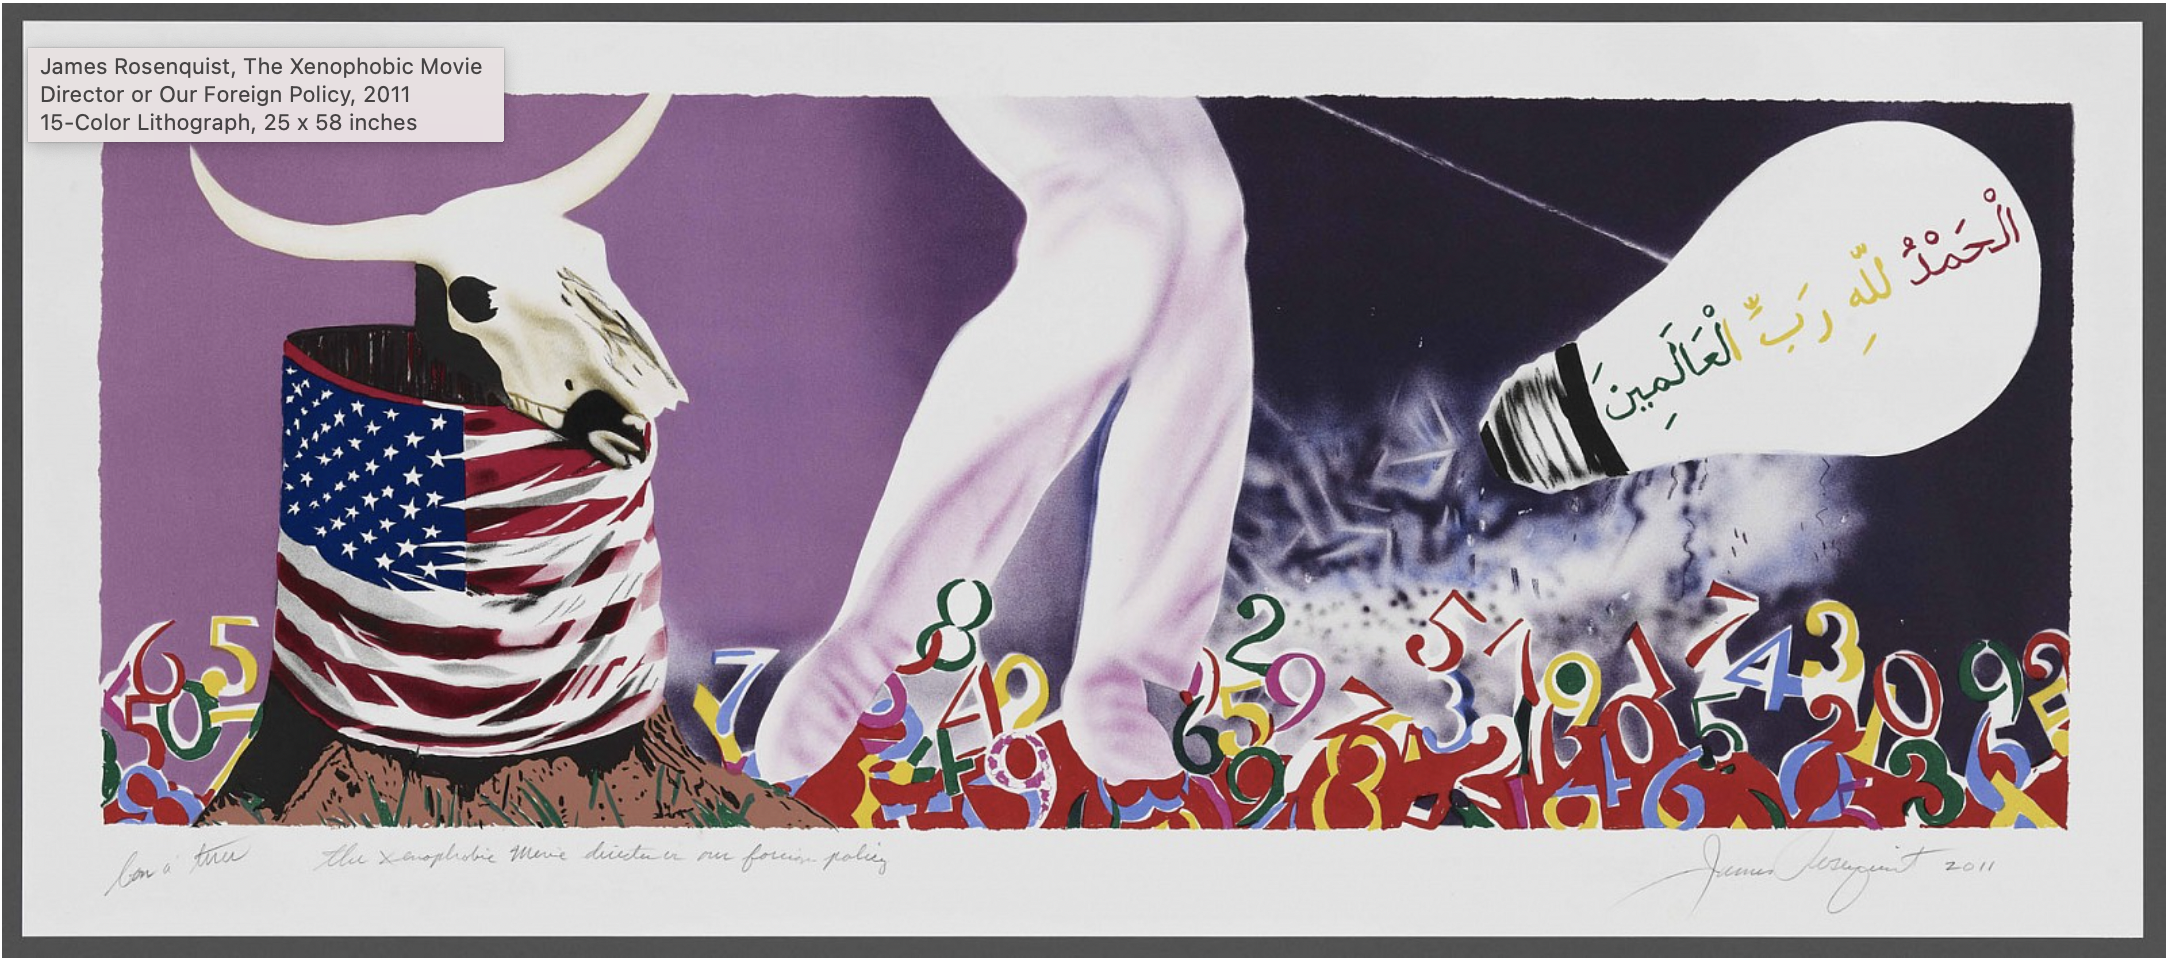 James Rosenquist, The Xenophobic Movie Director or Our Foreign Policy, 2011, 15-Color Lithograph, 25x 58 in.